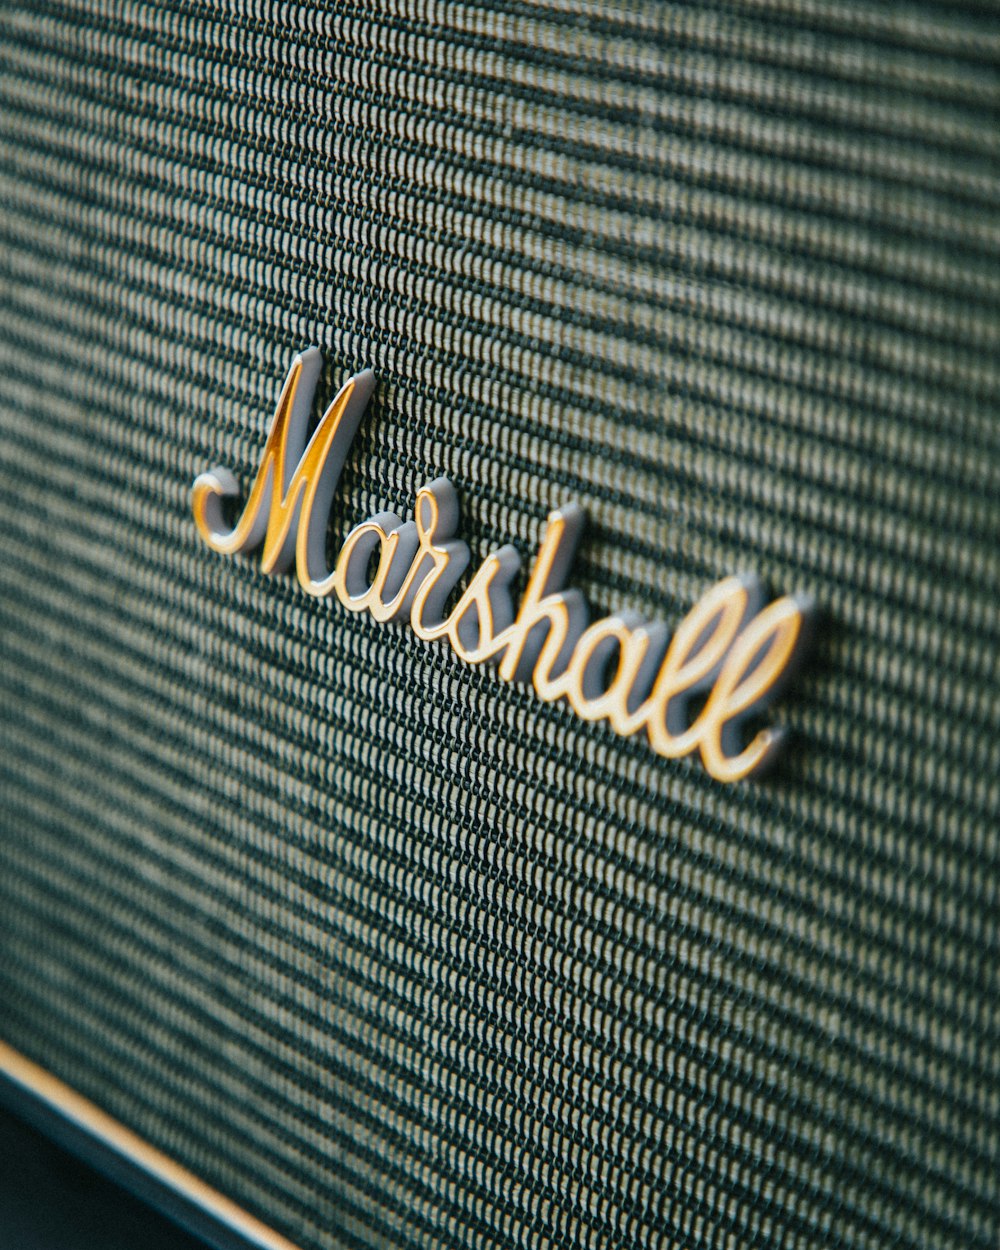 black and white marshall guitar amplifier